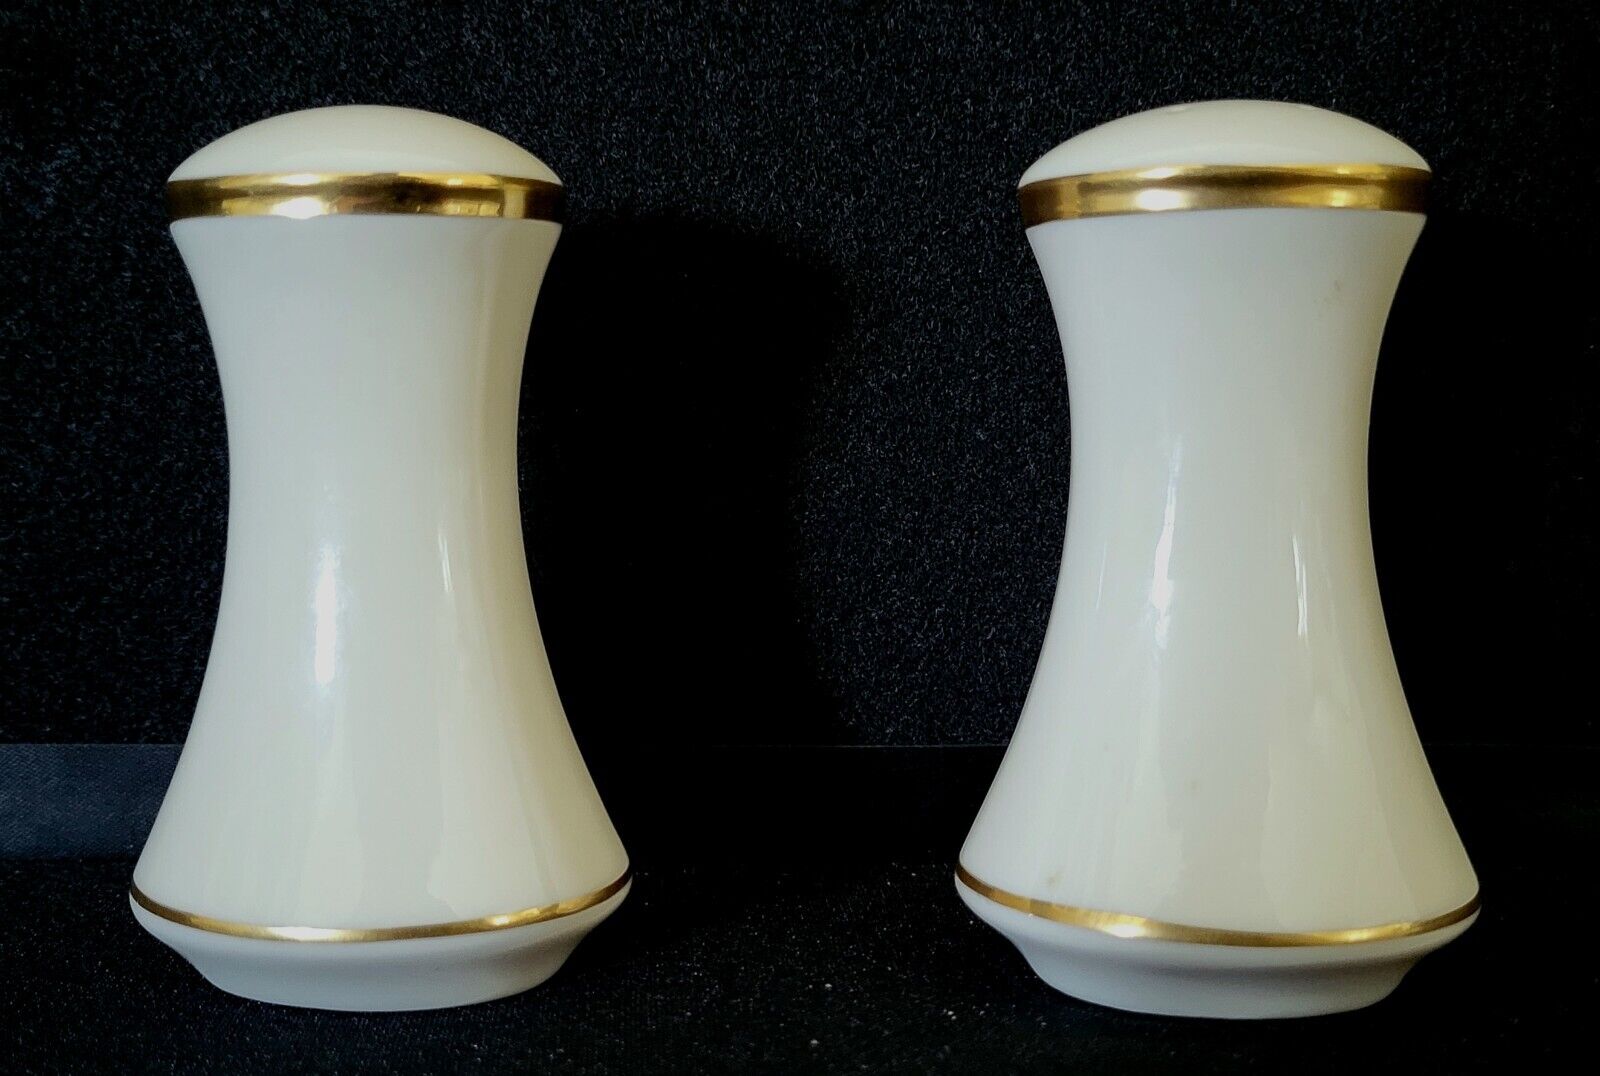 LENOX SALT AND PEPPER SHAKERS CREAM WITH GOLD TRIM